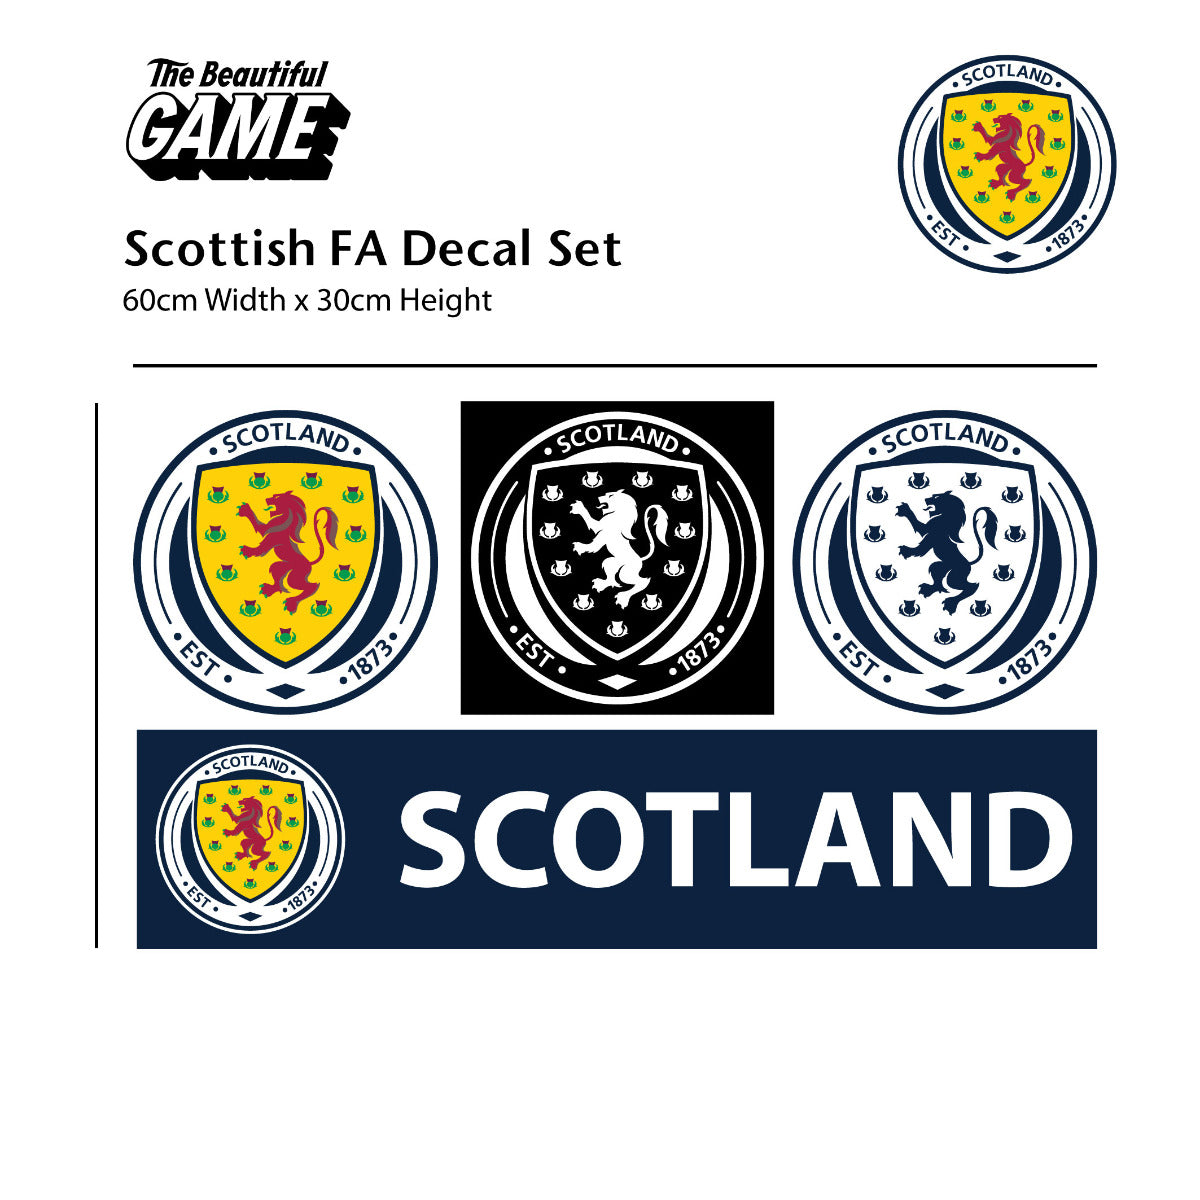 Scotland National Team - Crest & Personalised Name Wall Sticker + Decal Set